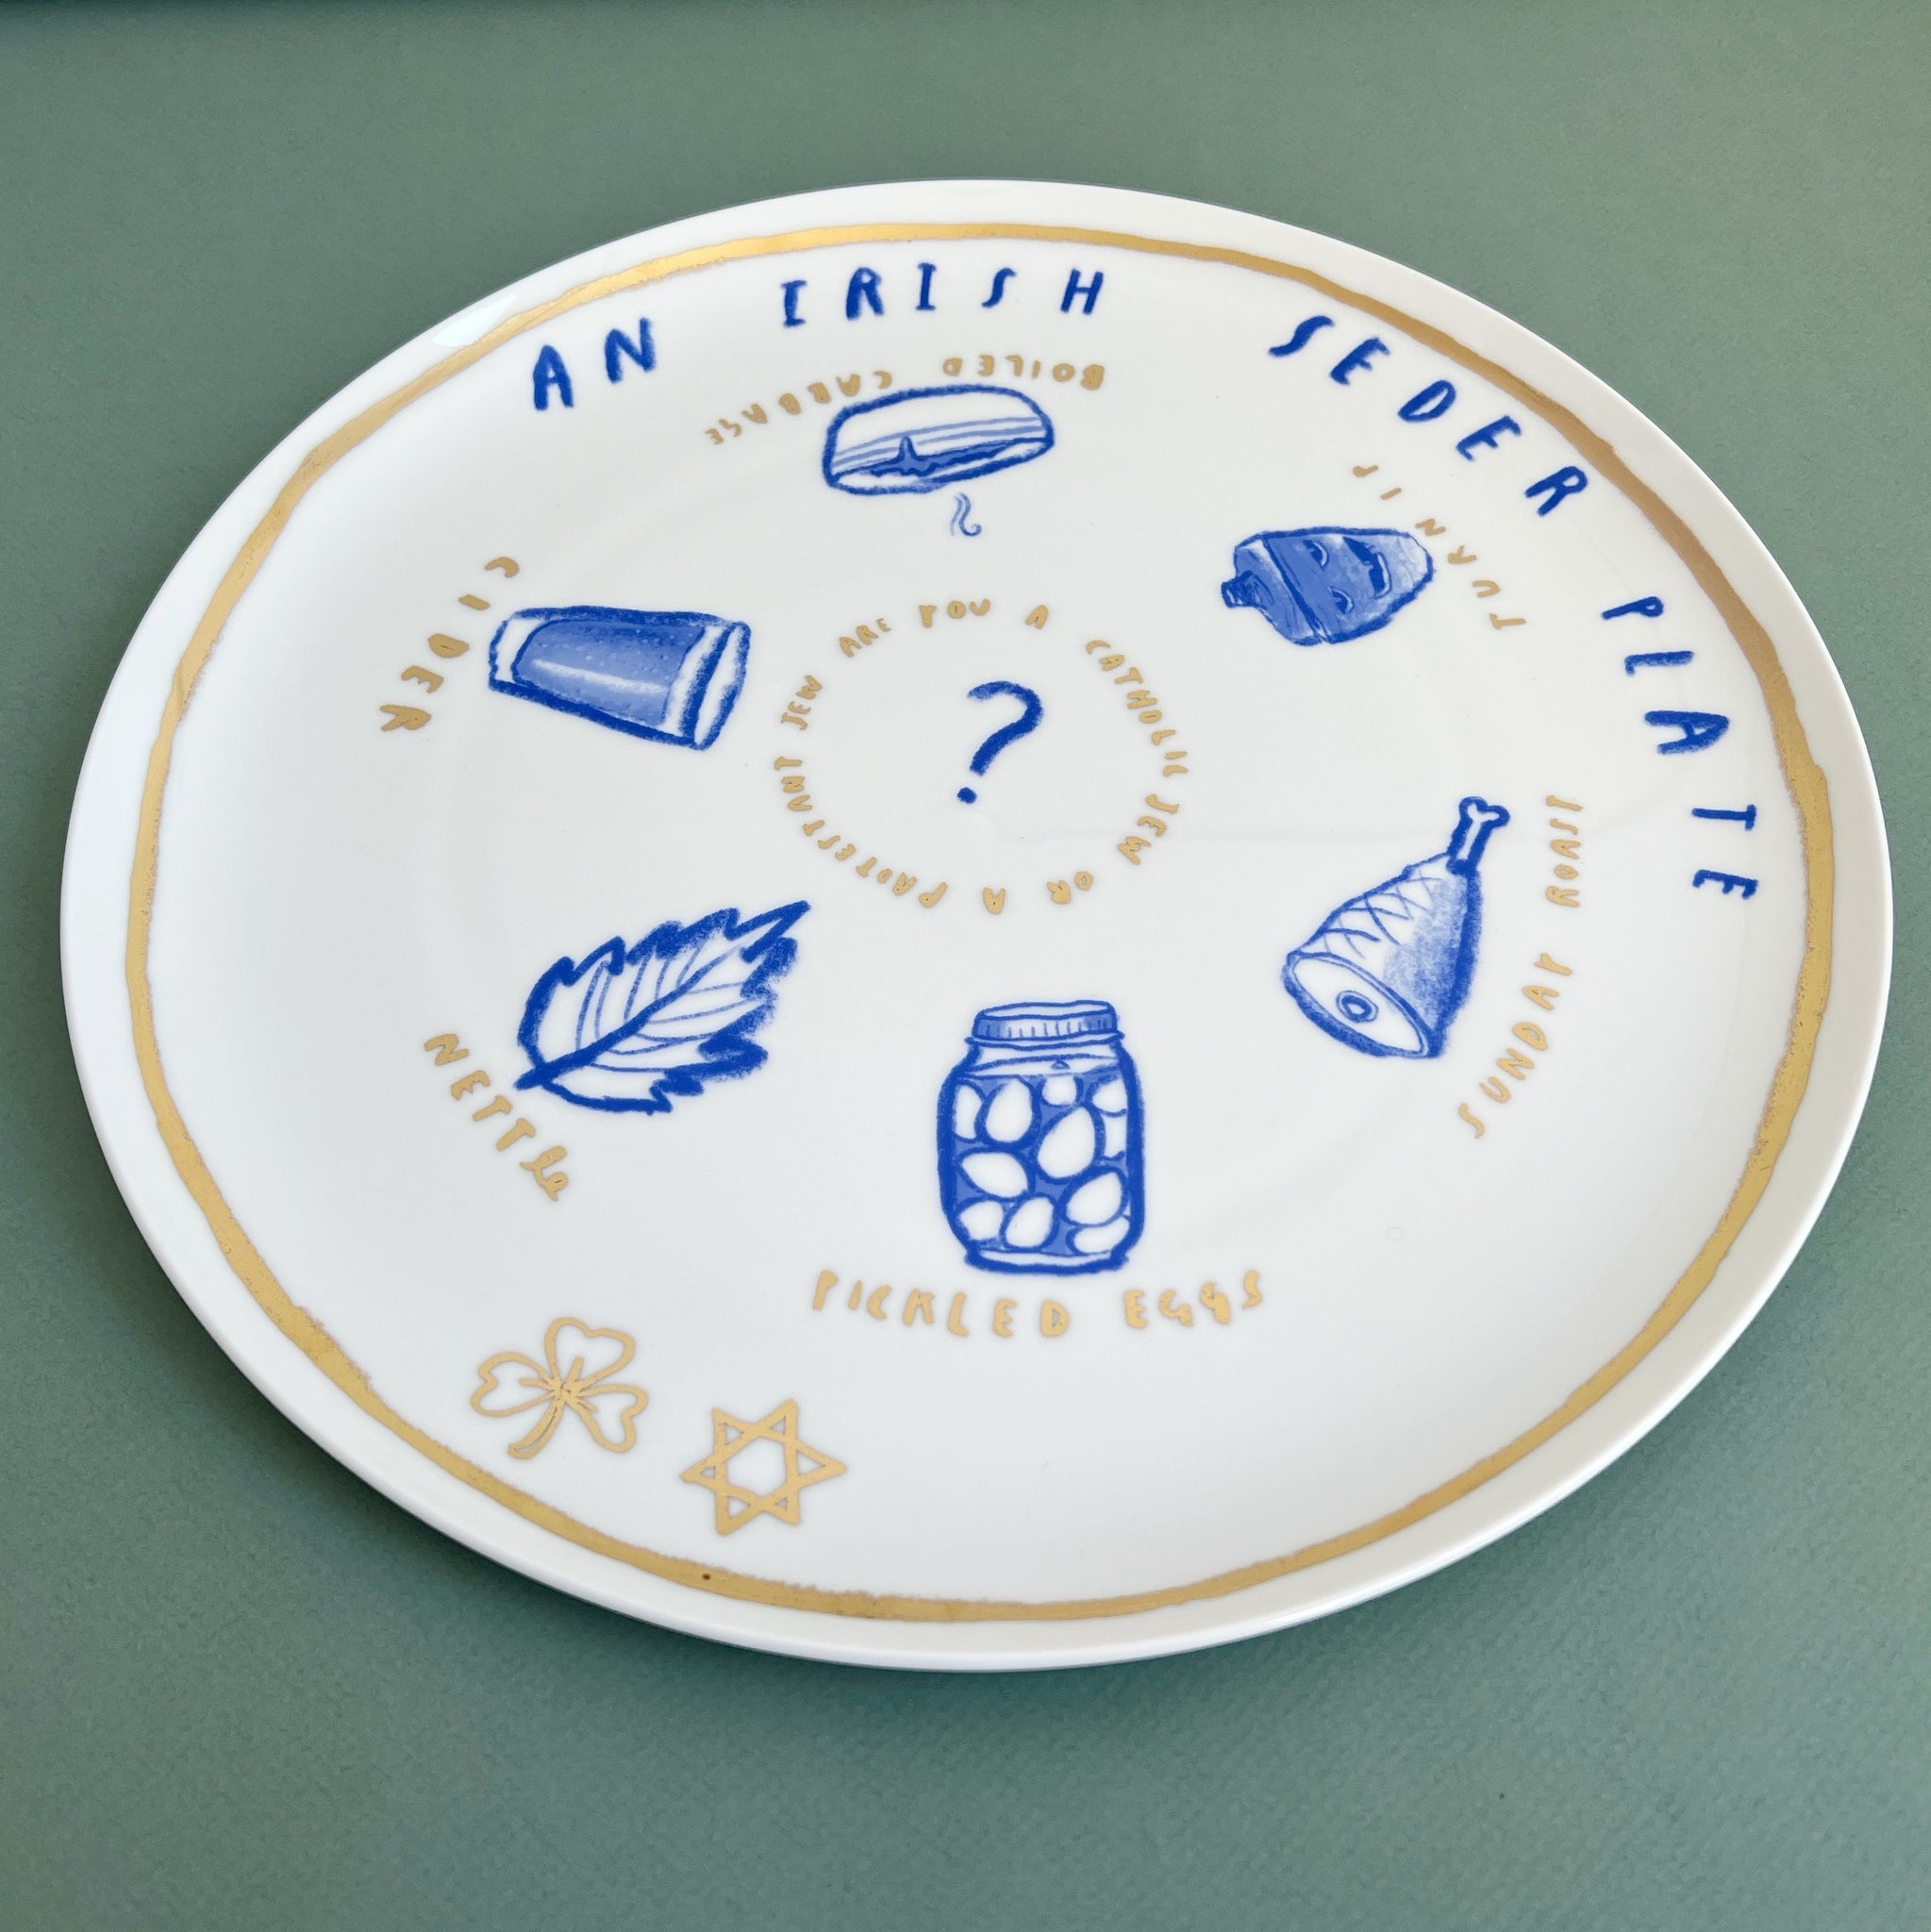 Seder Plate by Oliver Jeffers